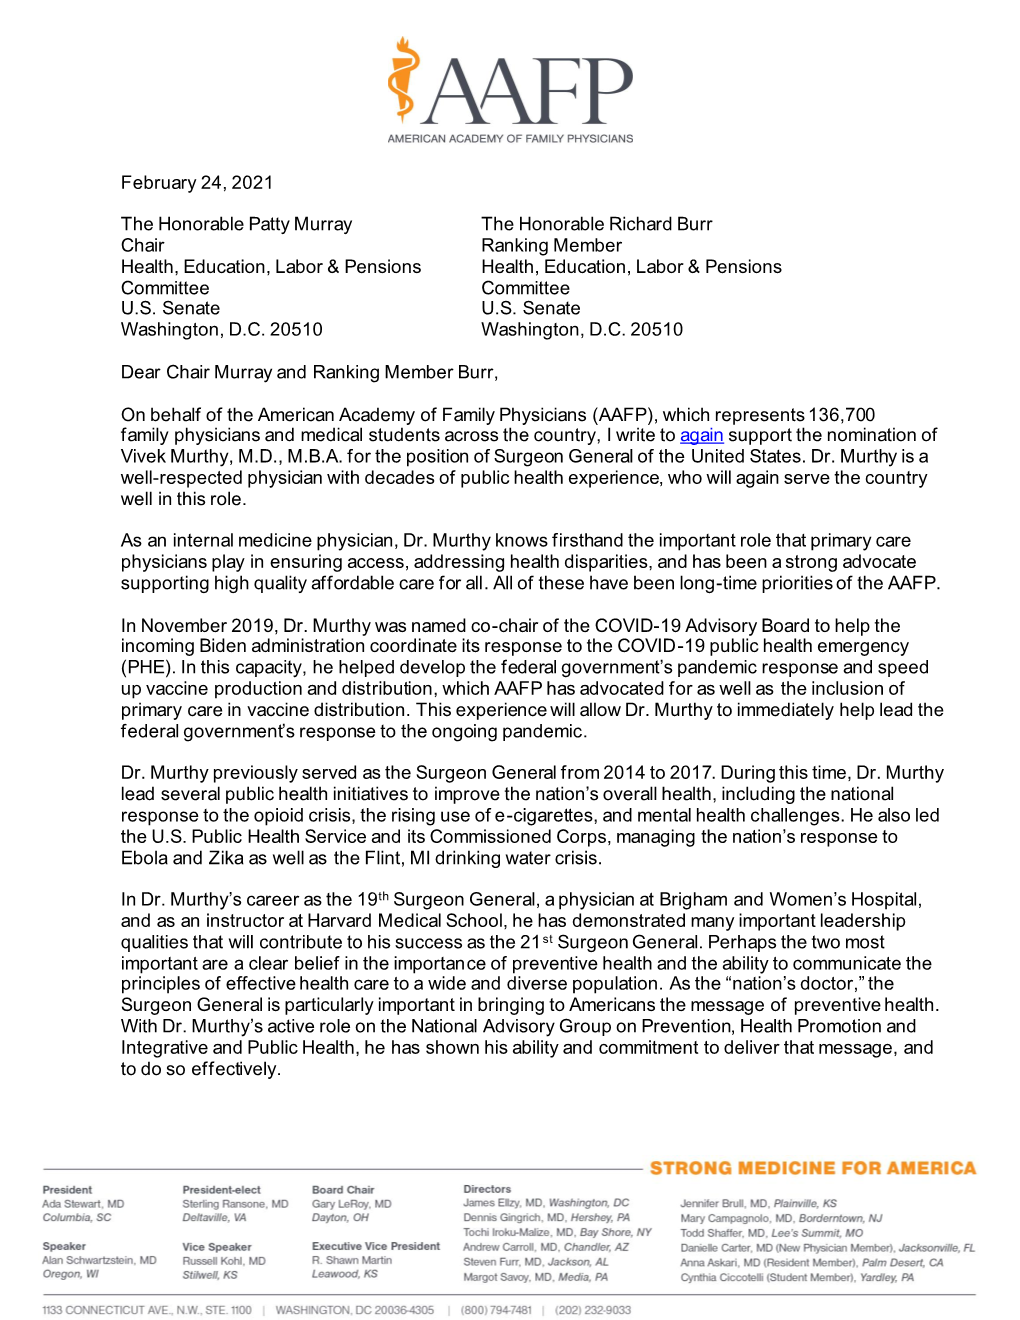 AAFP Letter to HELP Committee in Support of Dr. Murthy for Surgeon